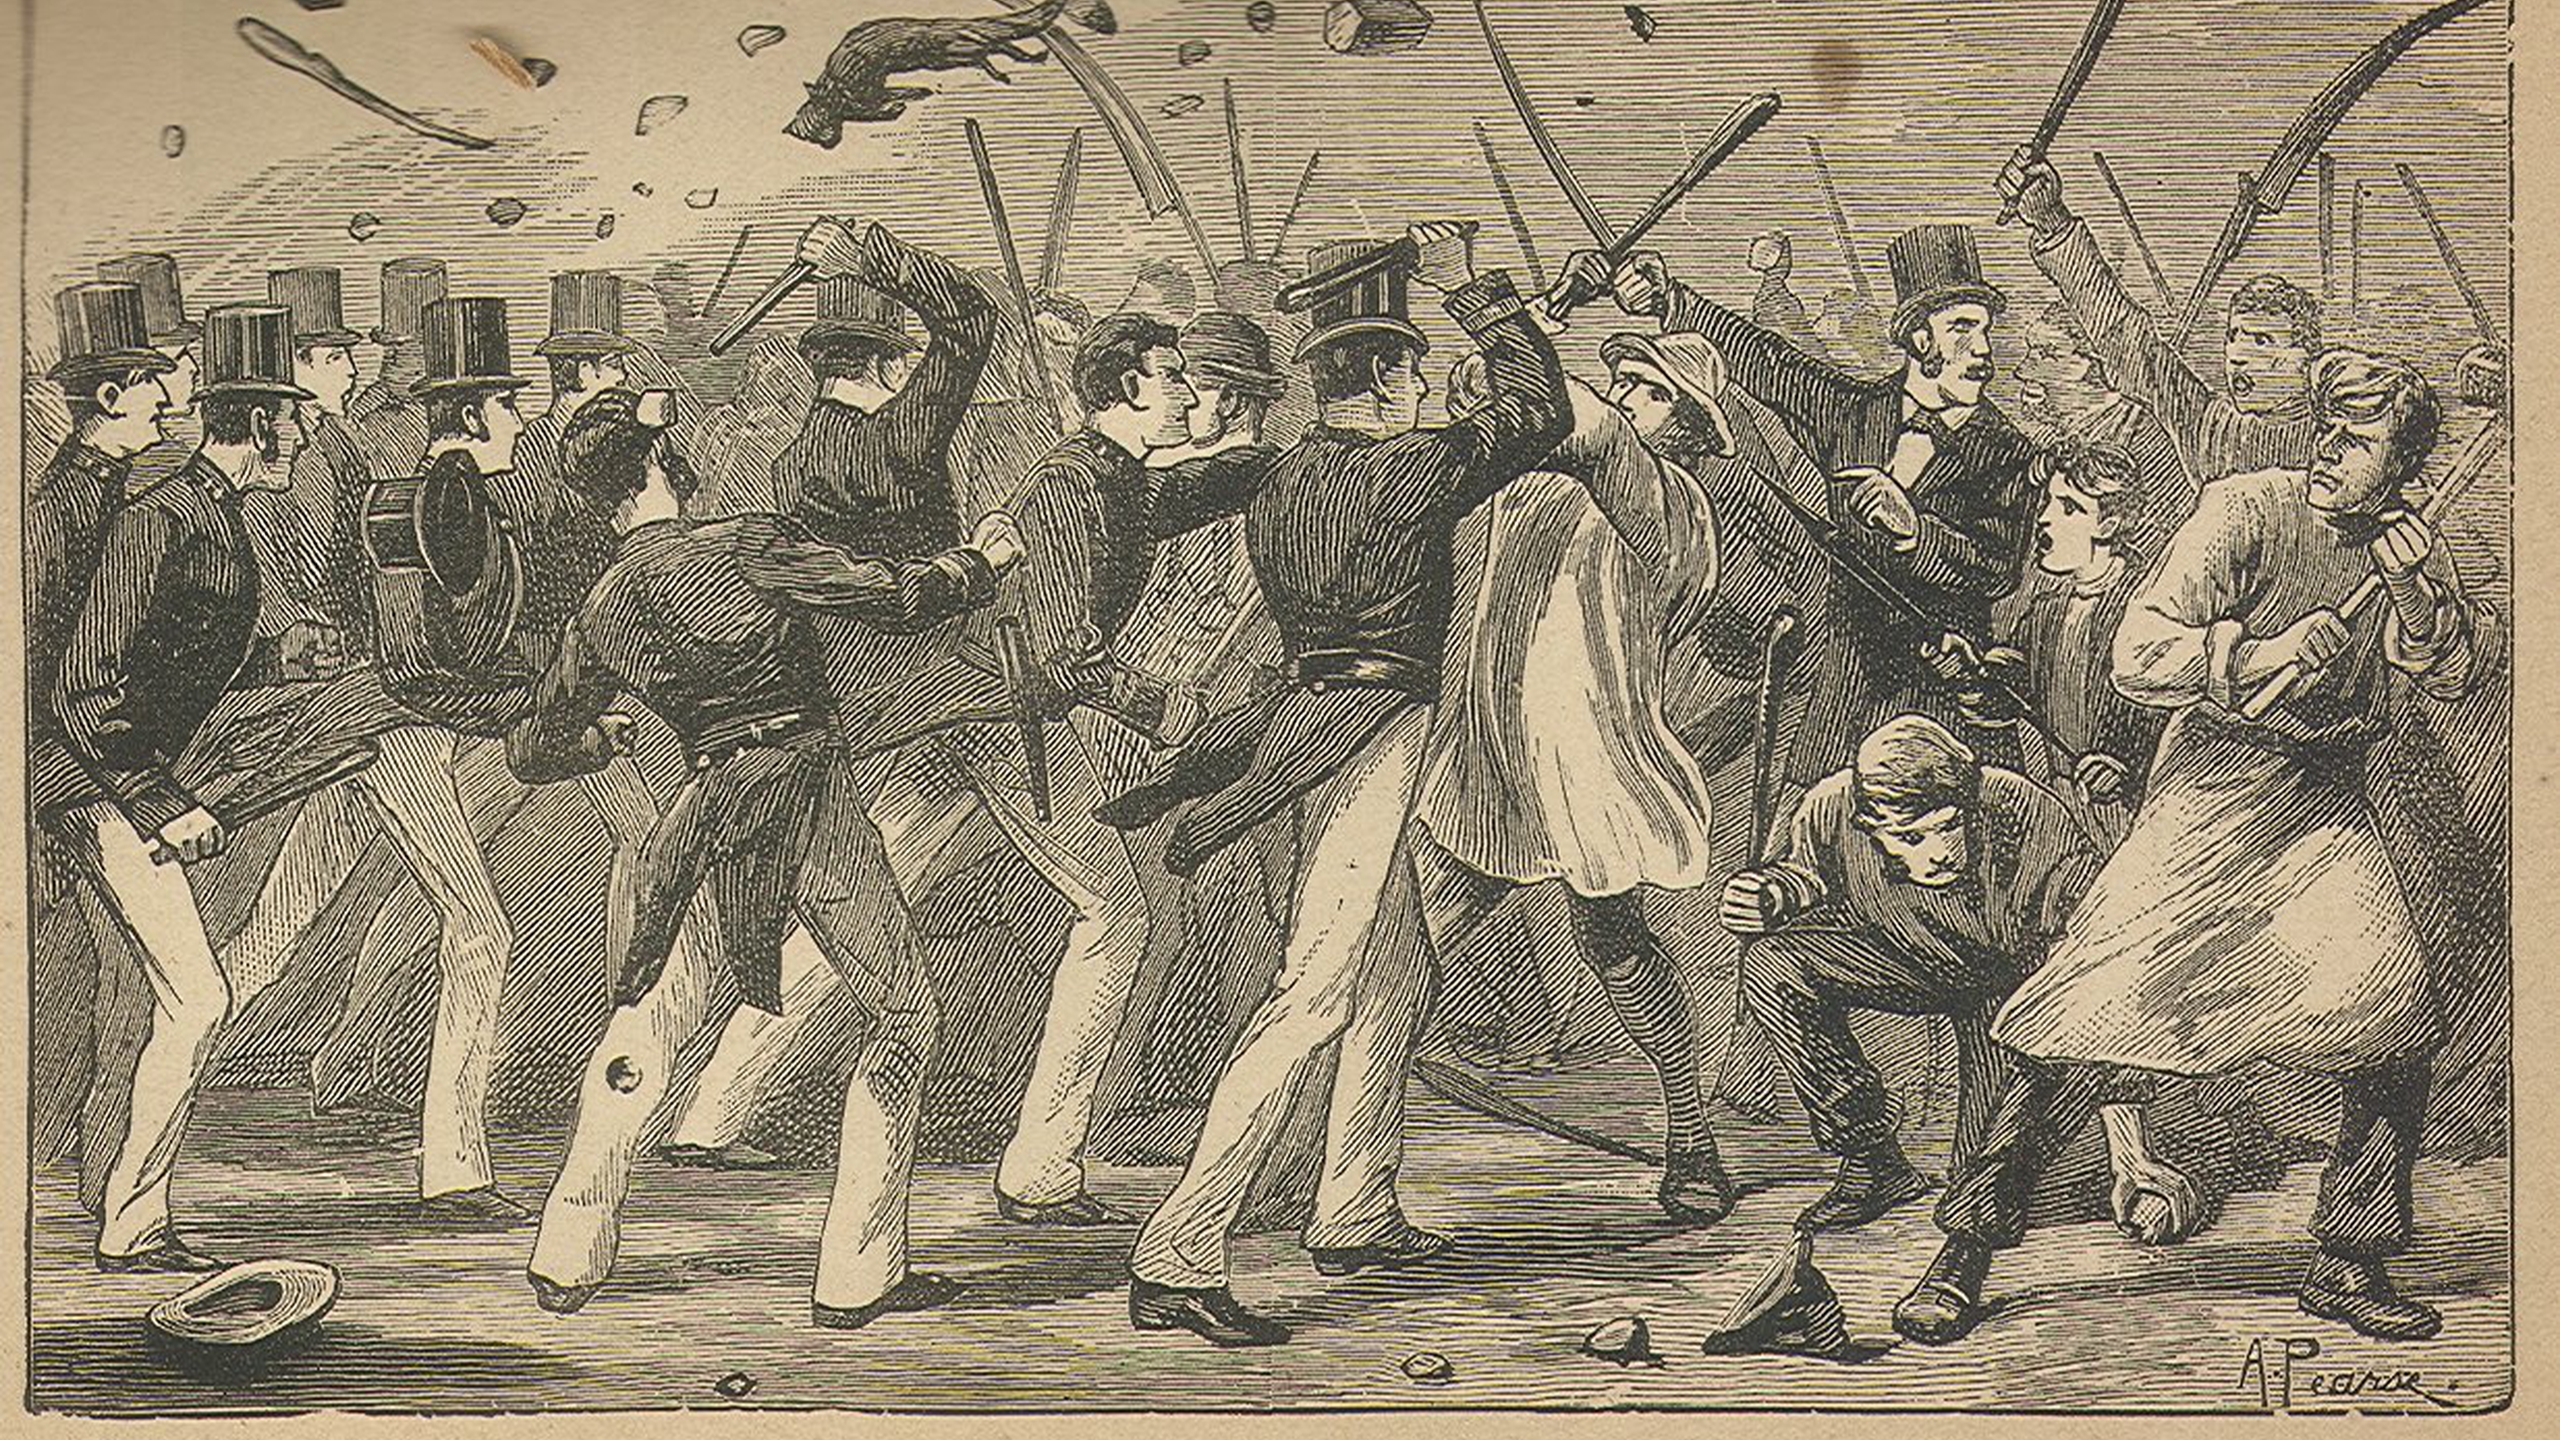 A detailed cartoon drawing of a group of men with truncheons, and in one case a sword, attacking another group of men.